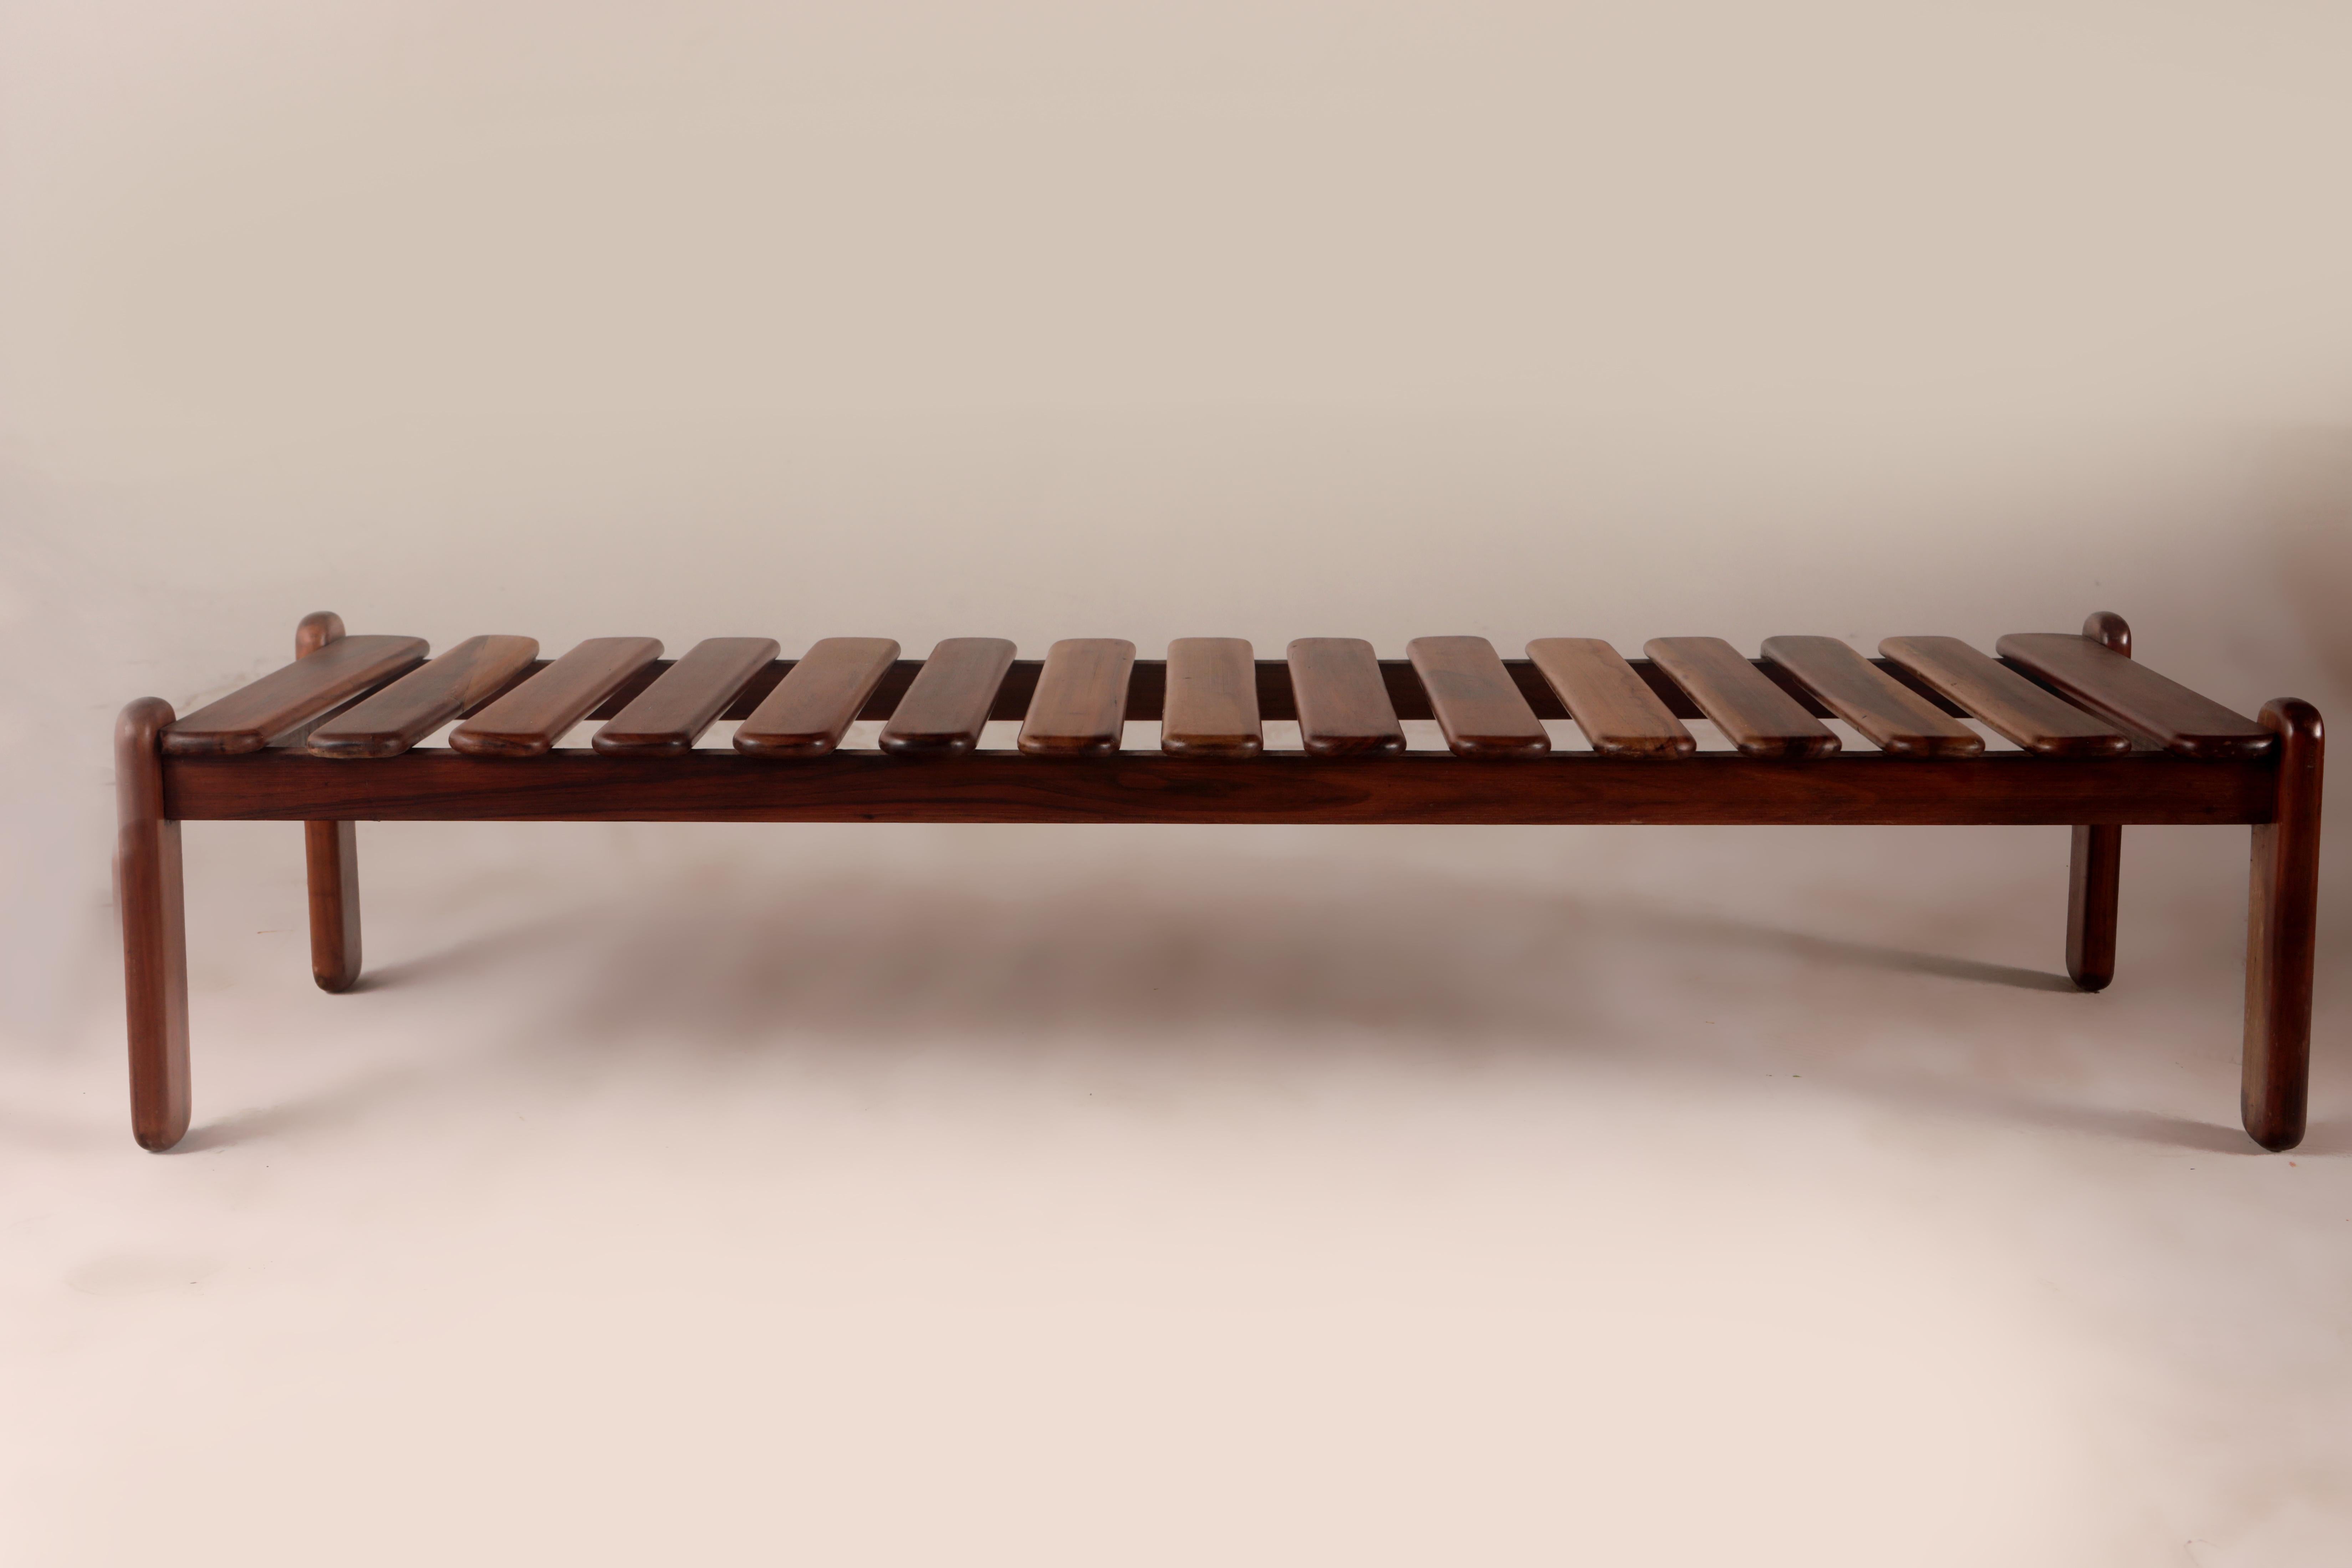 Mid-Century Modern slatted bench by Celina Decorações, Brazil 1960s.

Produced in the late 1960s, this bench consists of solid wooden slats with rounded edges, supported by four legs. 
Based in Rio de Janeiro, Celina Decorações produced